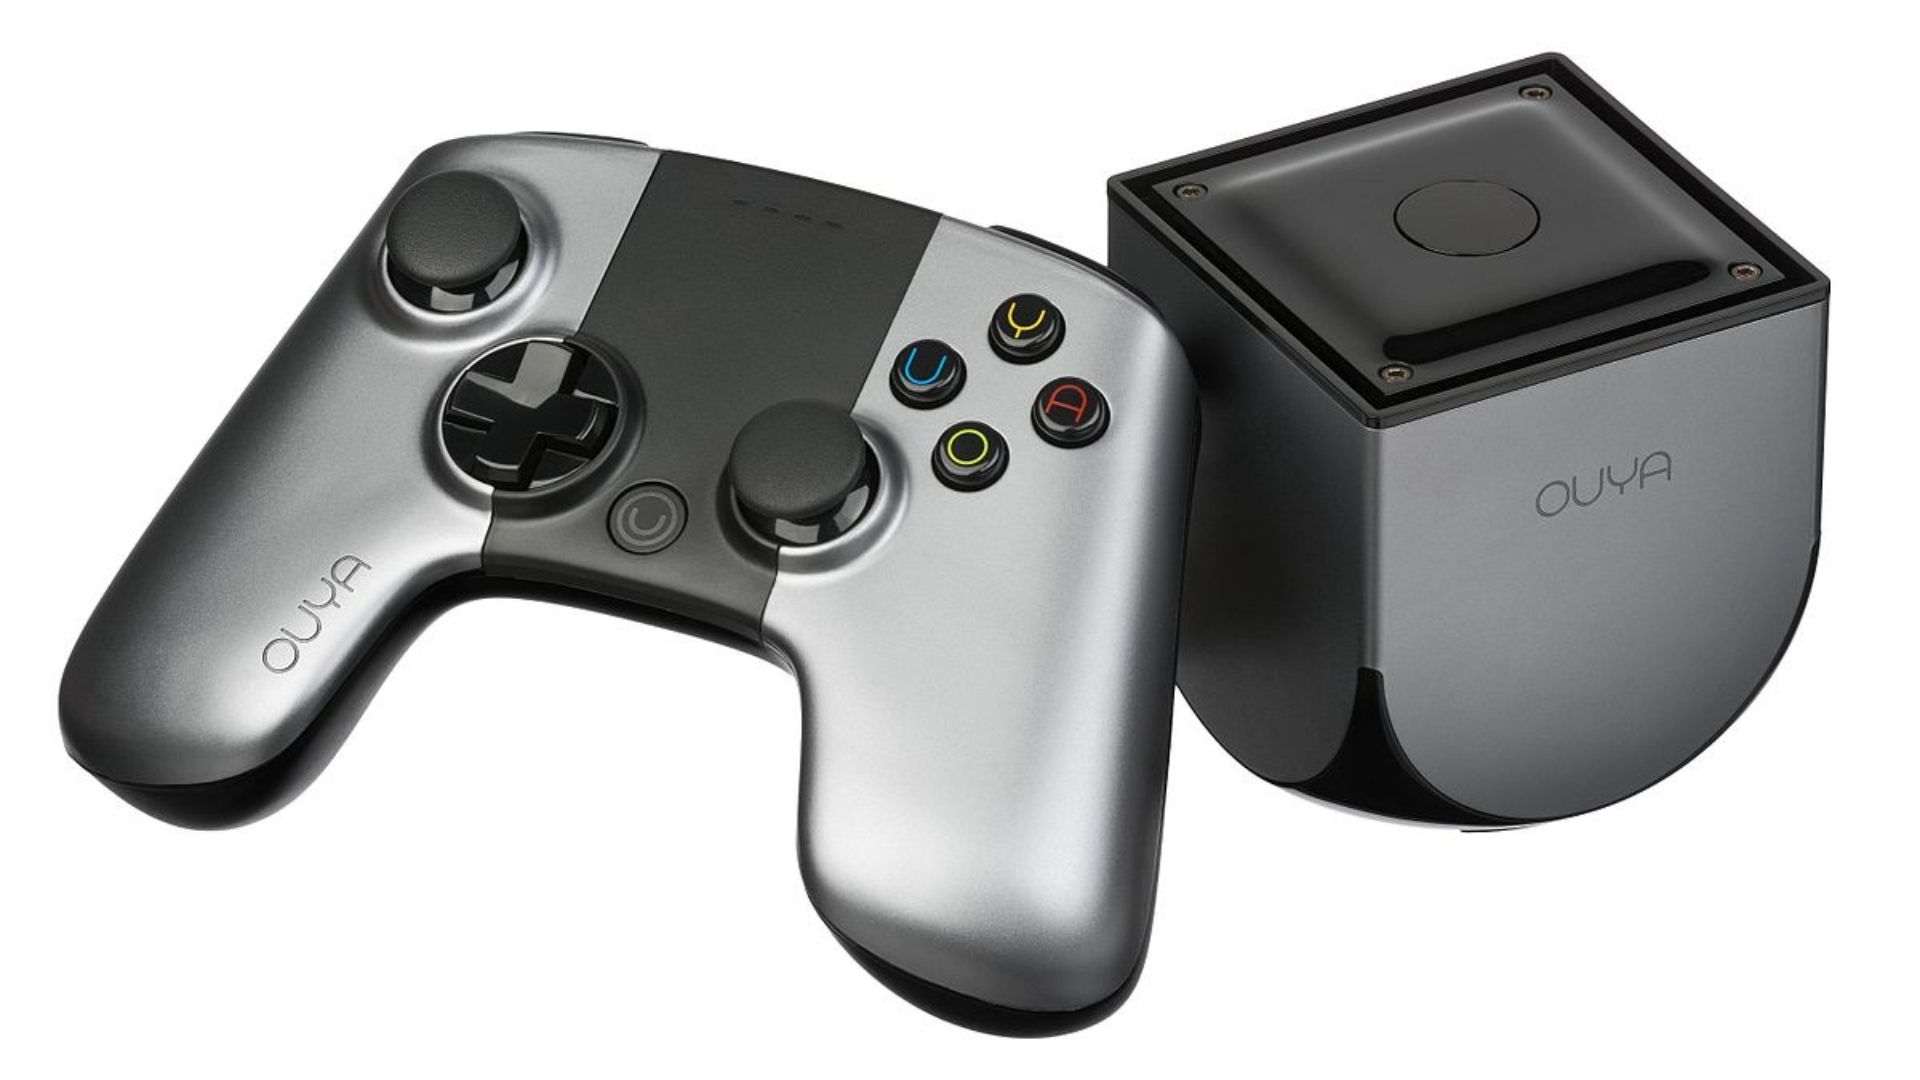 The Ouya console and controller